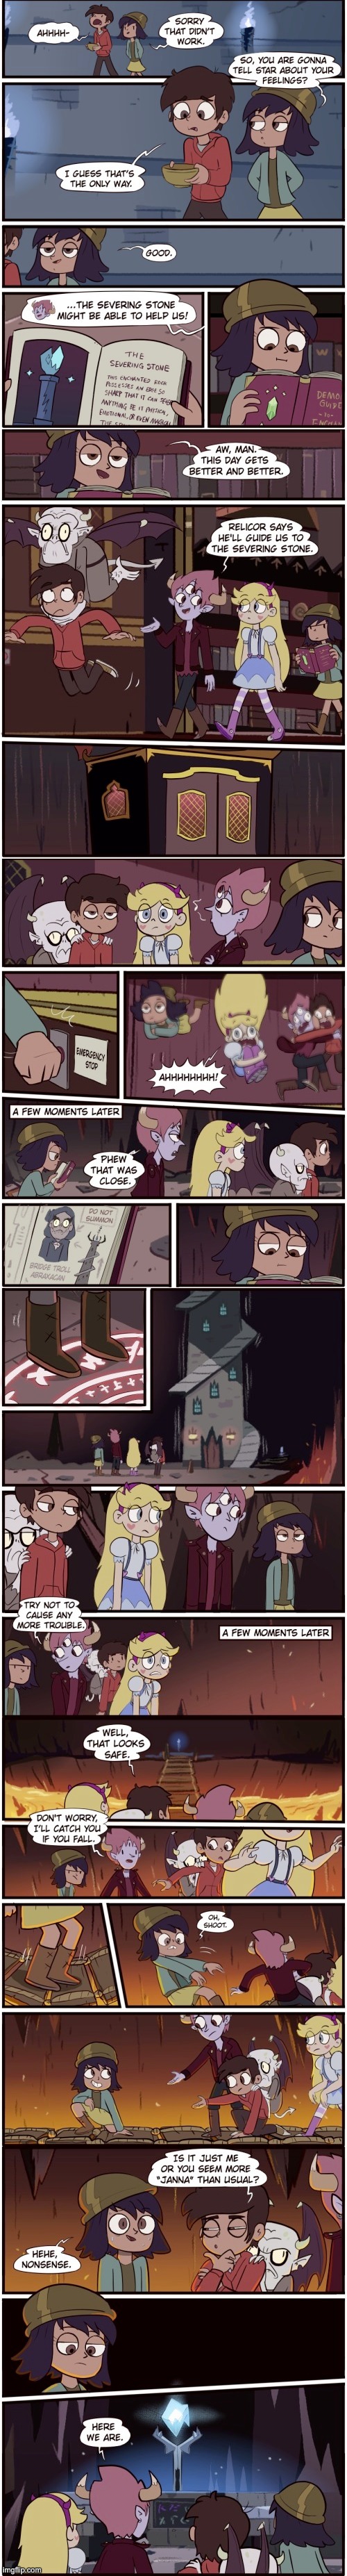 Tom vs Jannanigans: Happily Sever’d After (Part 3) | image tagged in morningmark,comics/cartoons,svtfoe,star vs the forces of evil,comics,memes | made w/ Imgflip meme maker